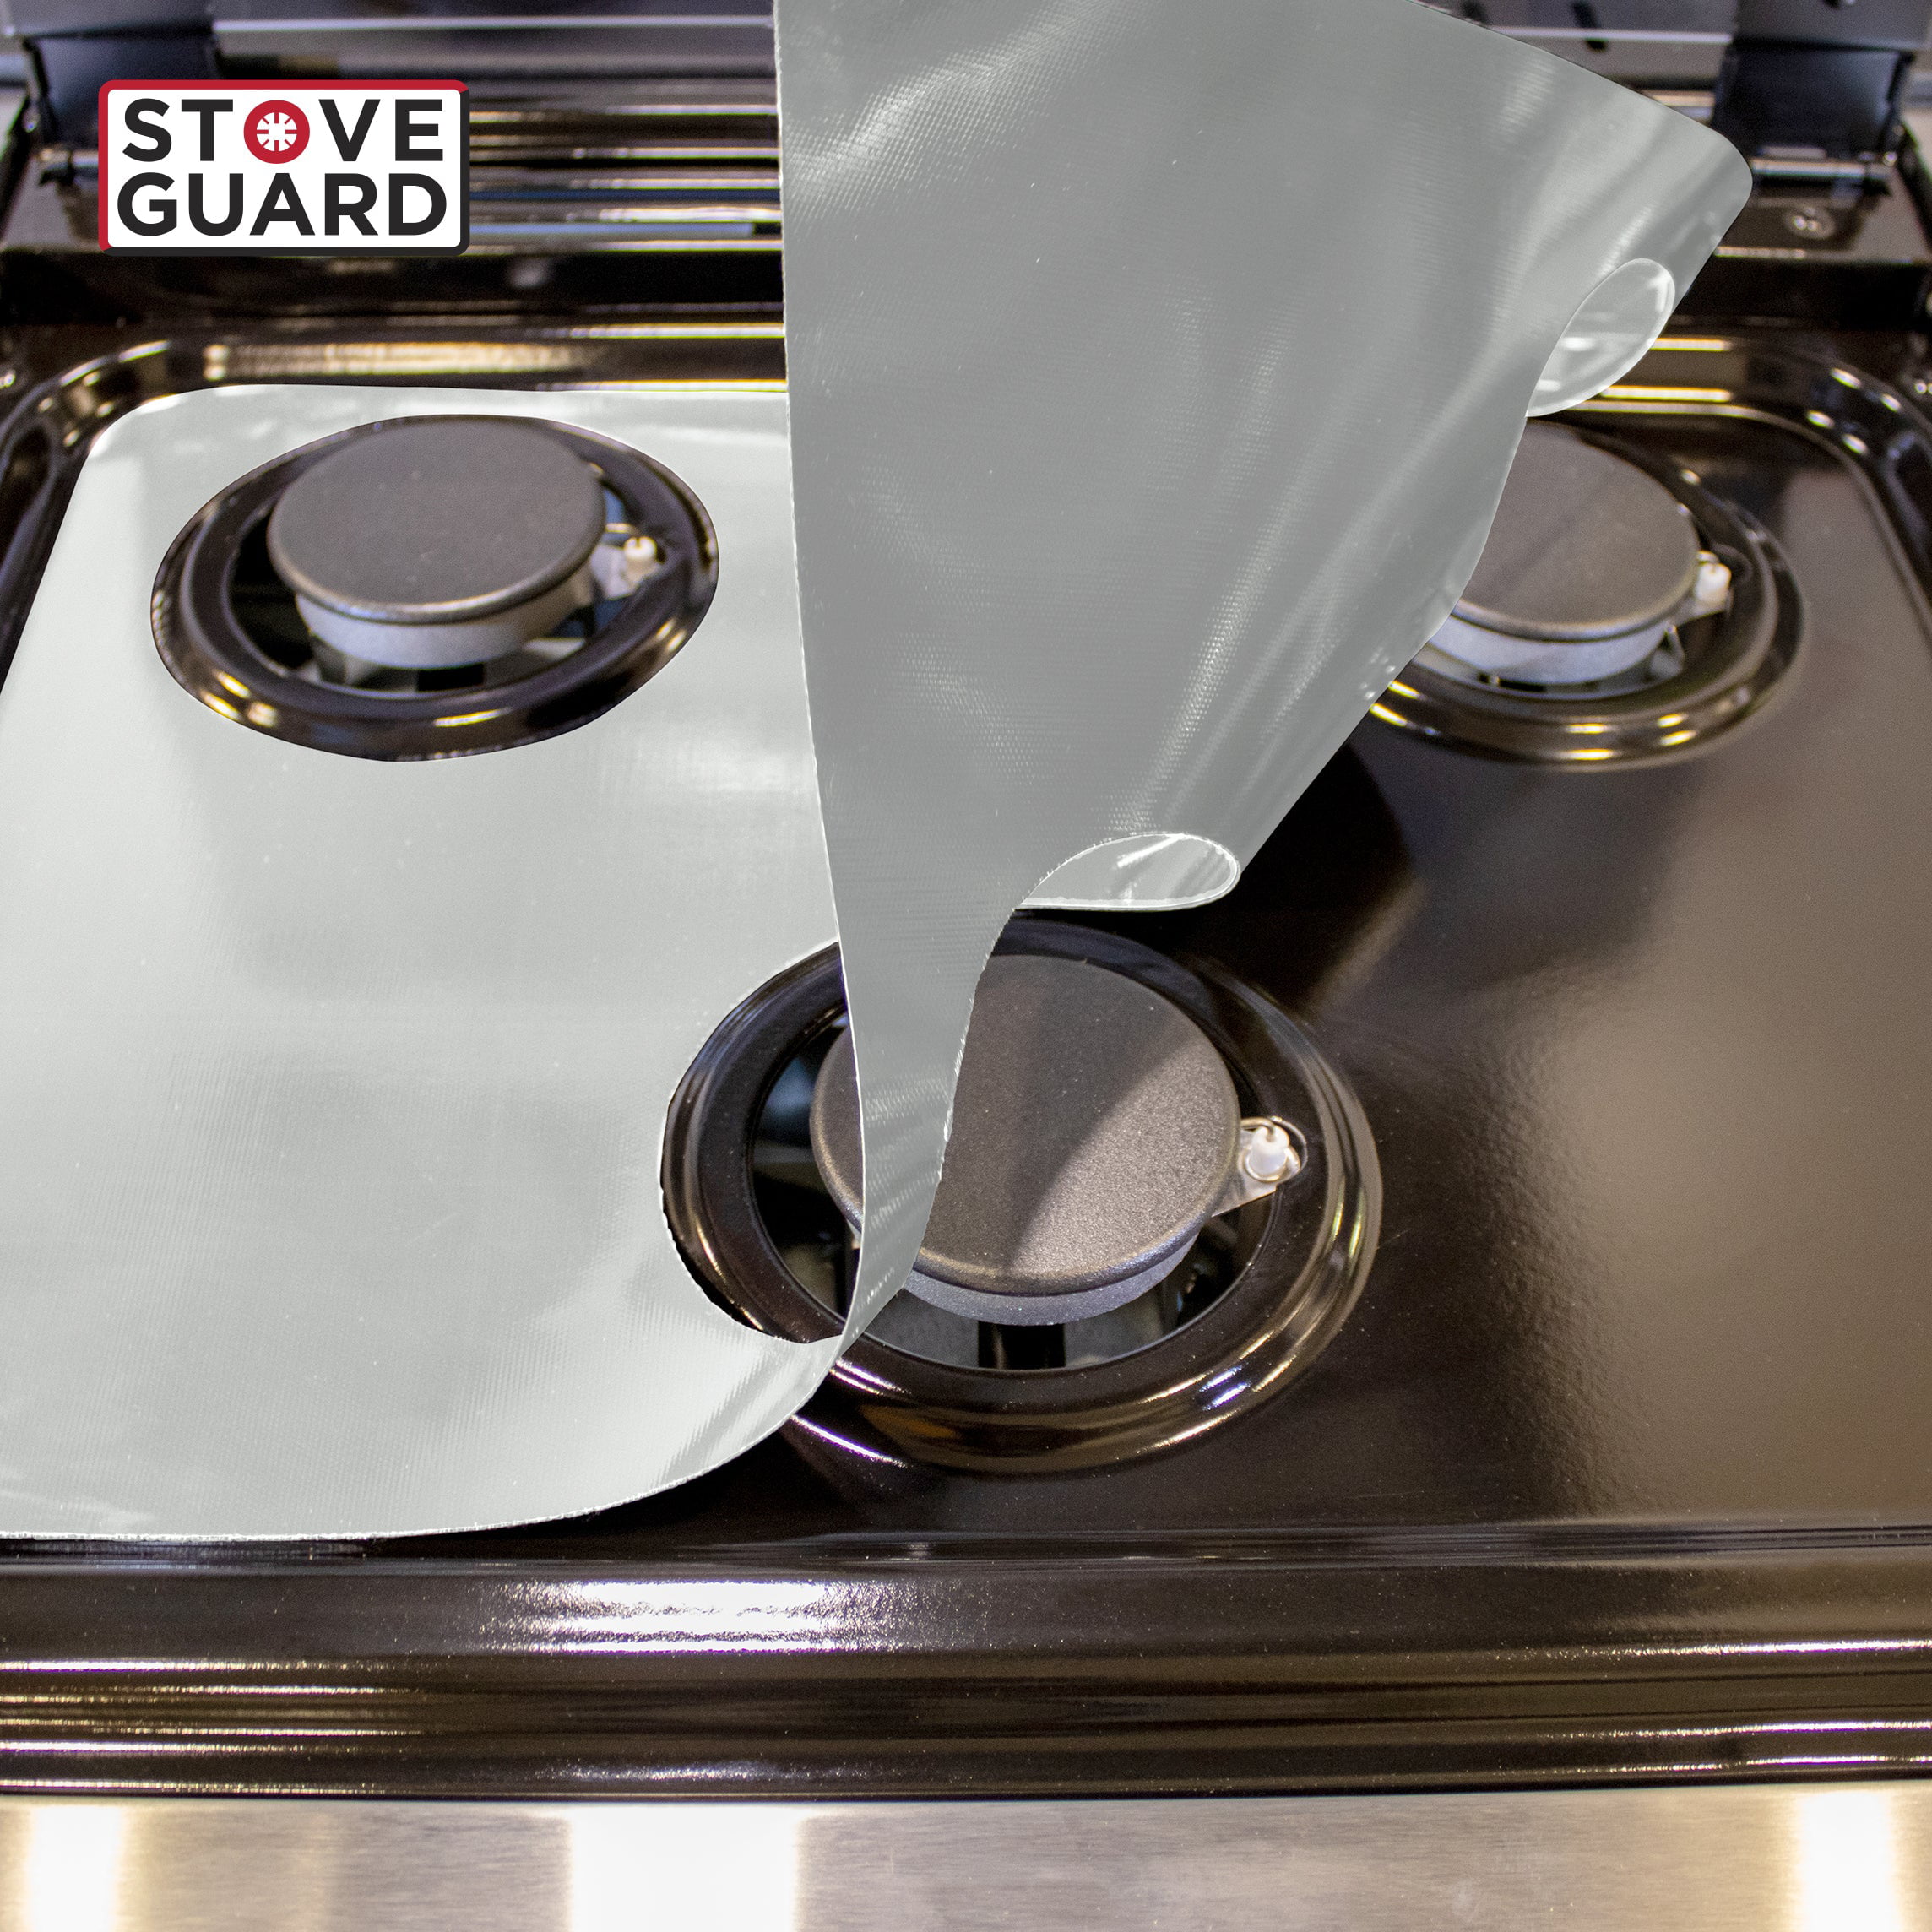 Custom Cut Ultra Thin Easy Clean Stove Liner Made in the USA StoveGuard Stove Protectors for Samsung Gas Ranges Silver for Stainless Steel Model NA30R5310FG 